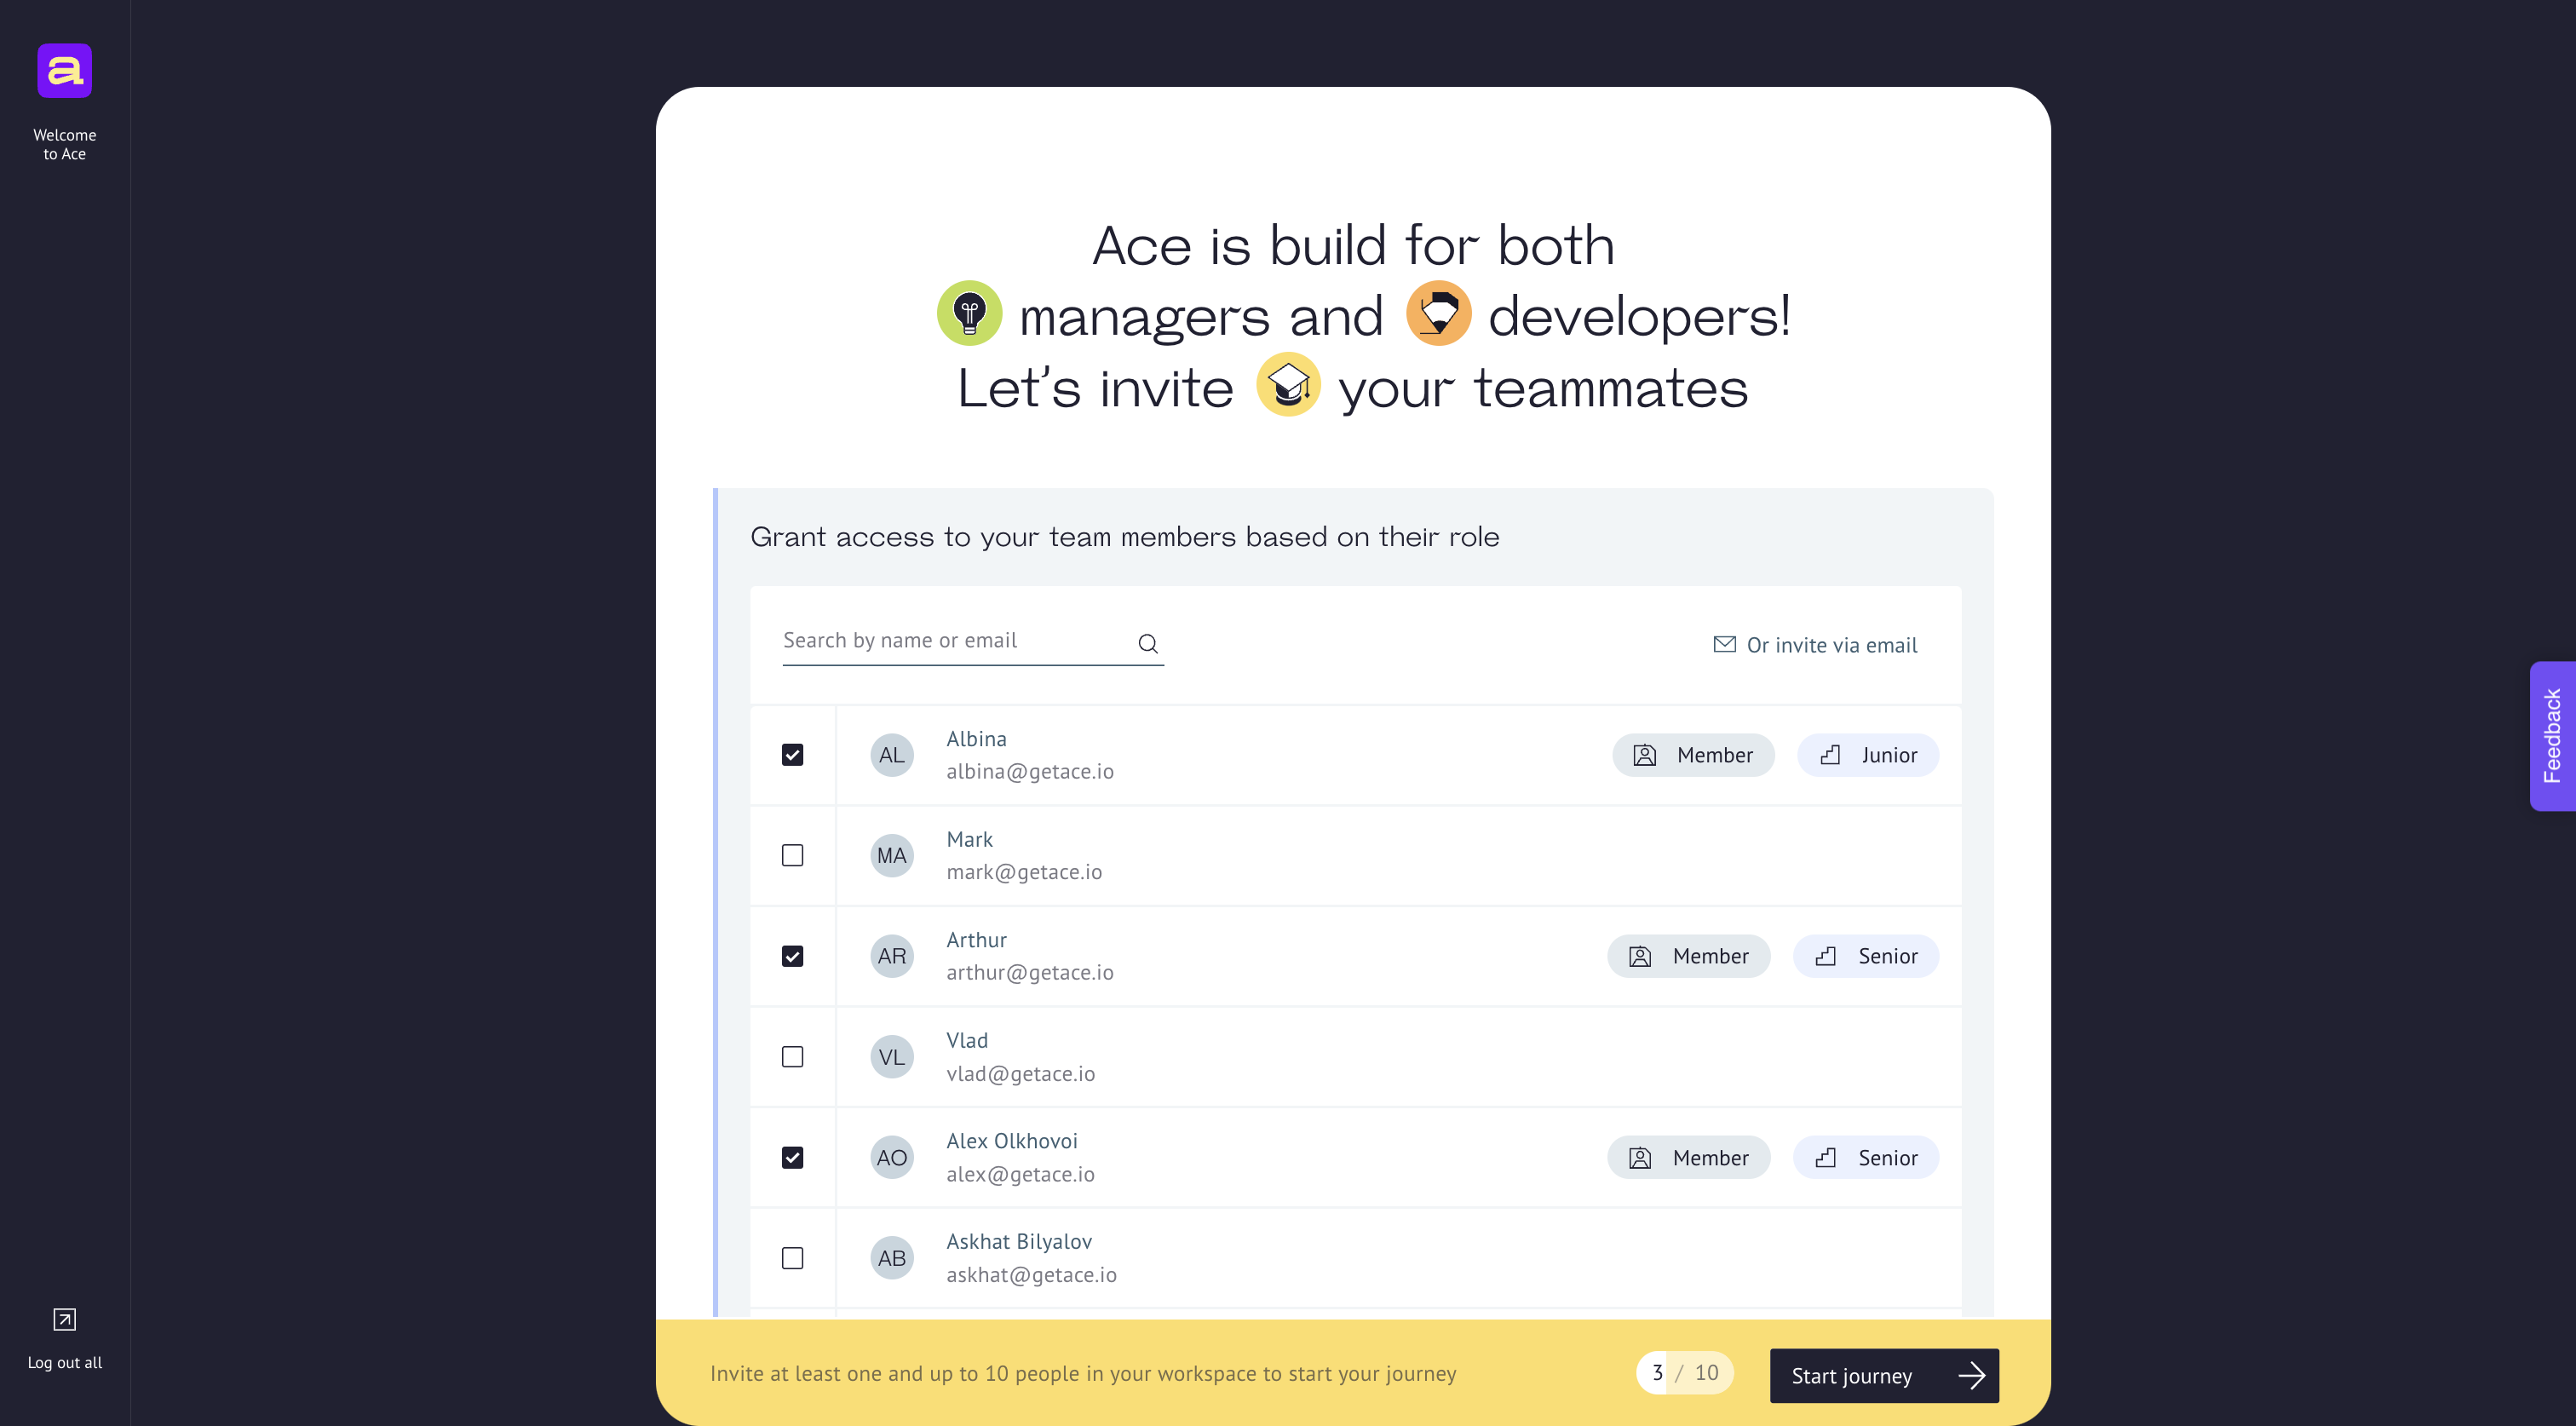 And automatically identify career path level for each developer in your team